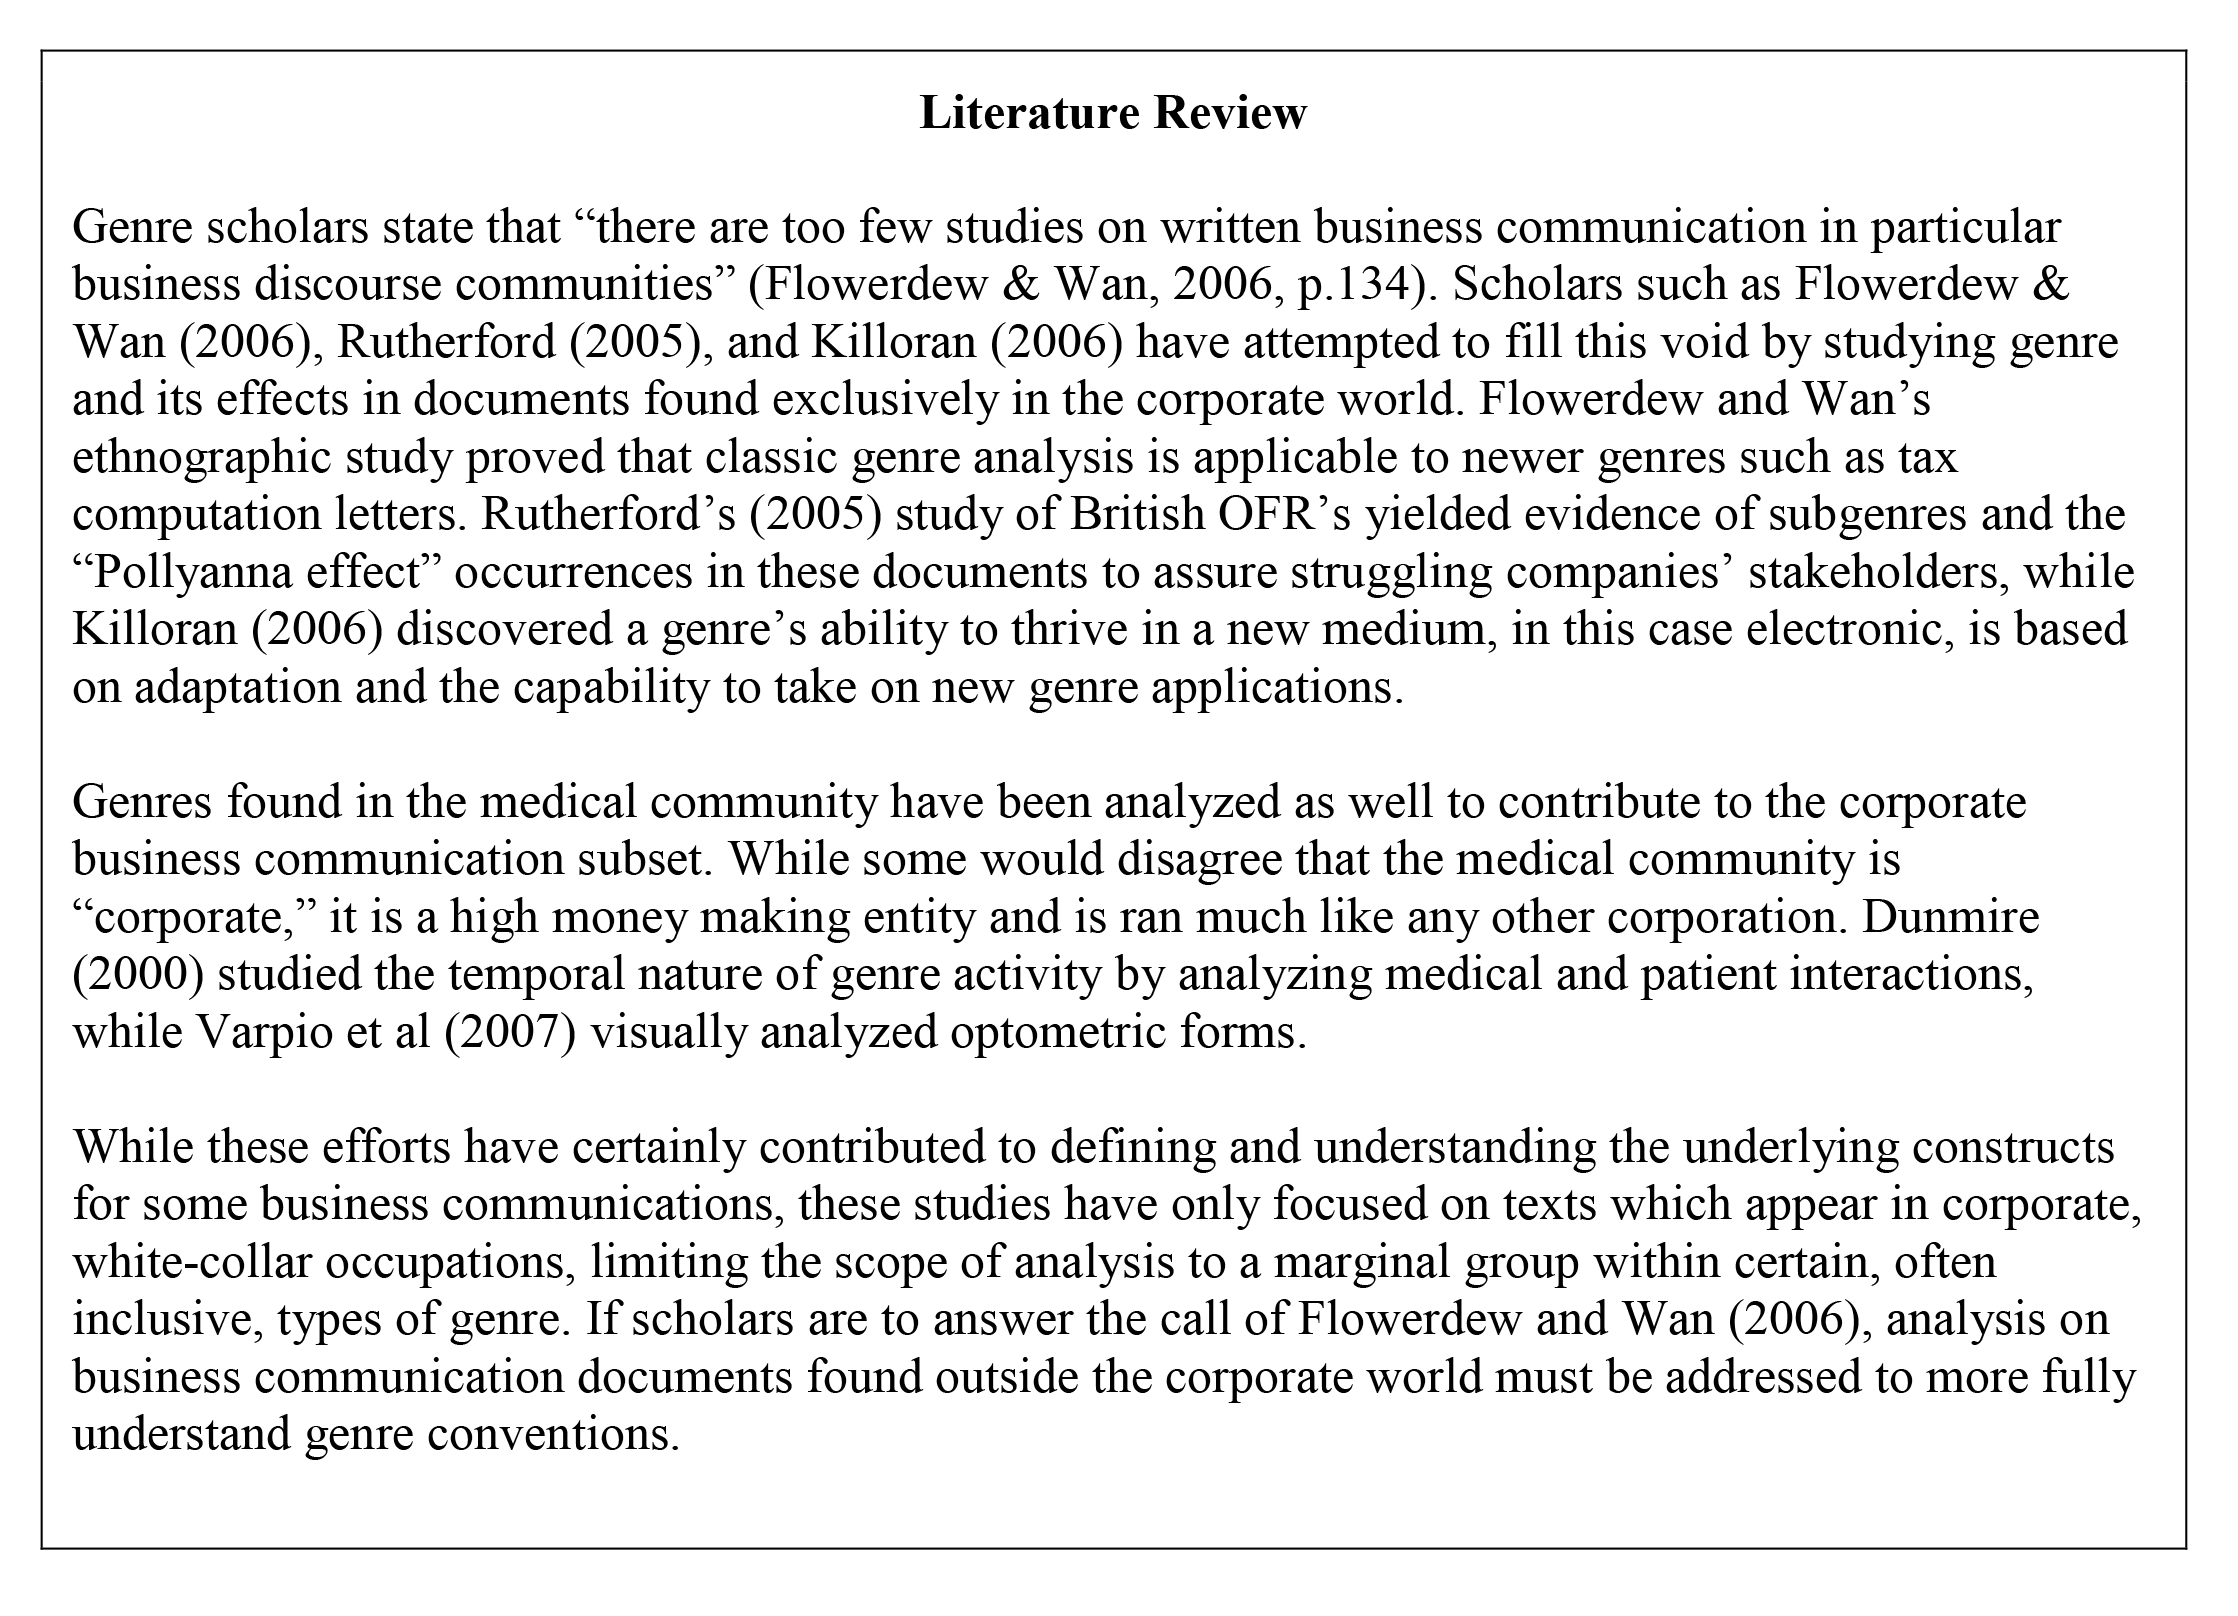 Literature review example